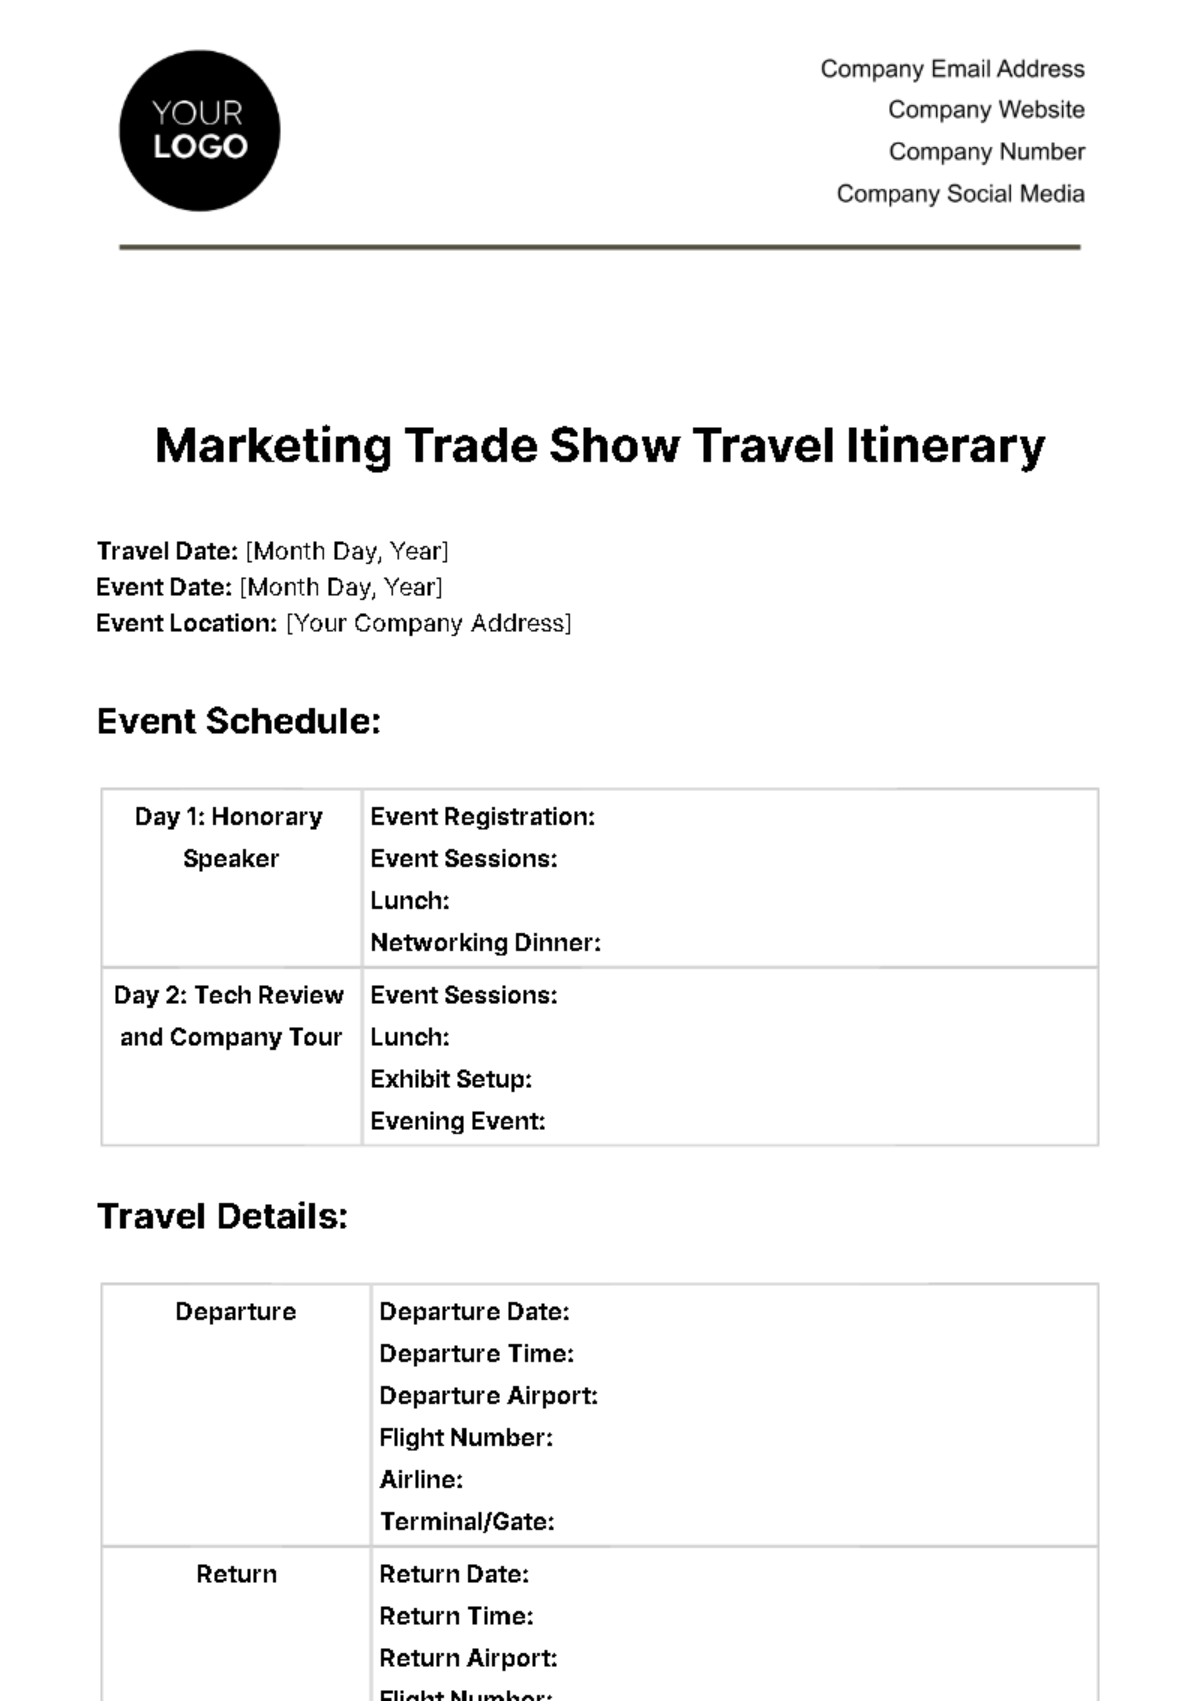 Free Marketing Trade Show Travel Itinerary Template